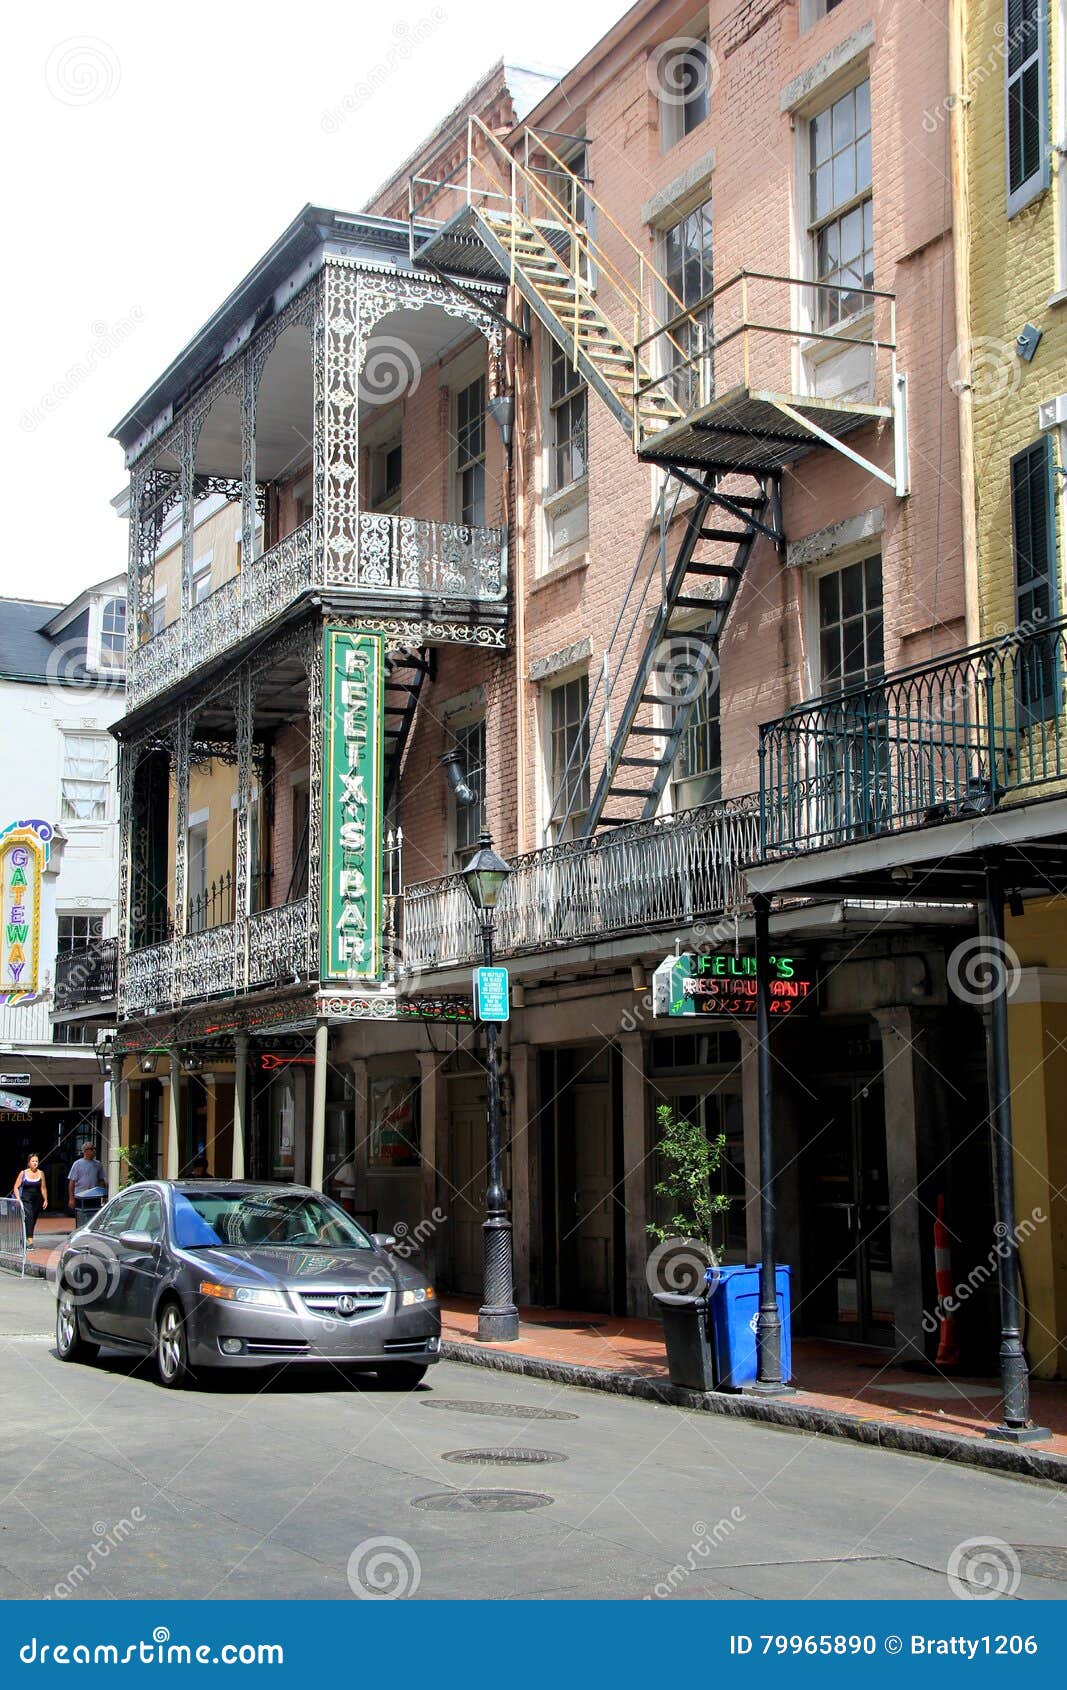 Gorgeous Architecture with Metal Railings Andbalconies, Felix`s Bar ...